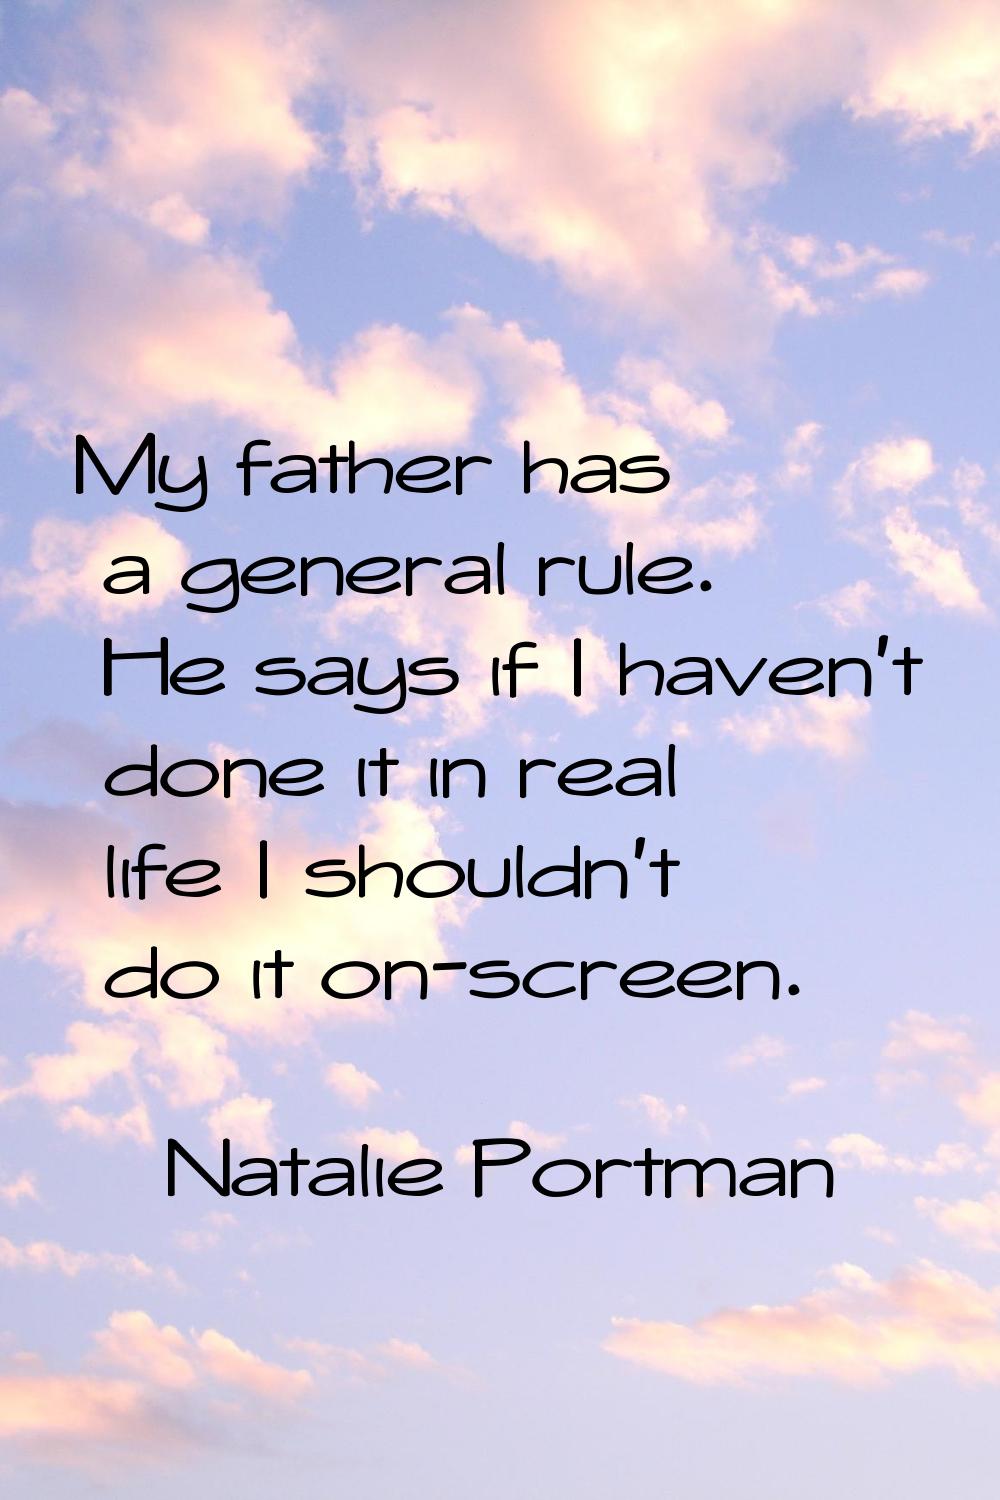 My father has a general rule. He says if I haven't done it in real life I shouldn't do it on-screen